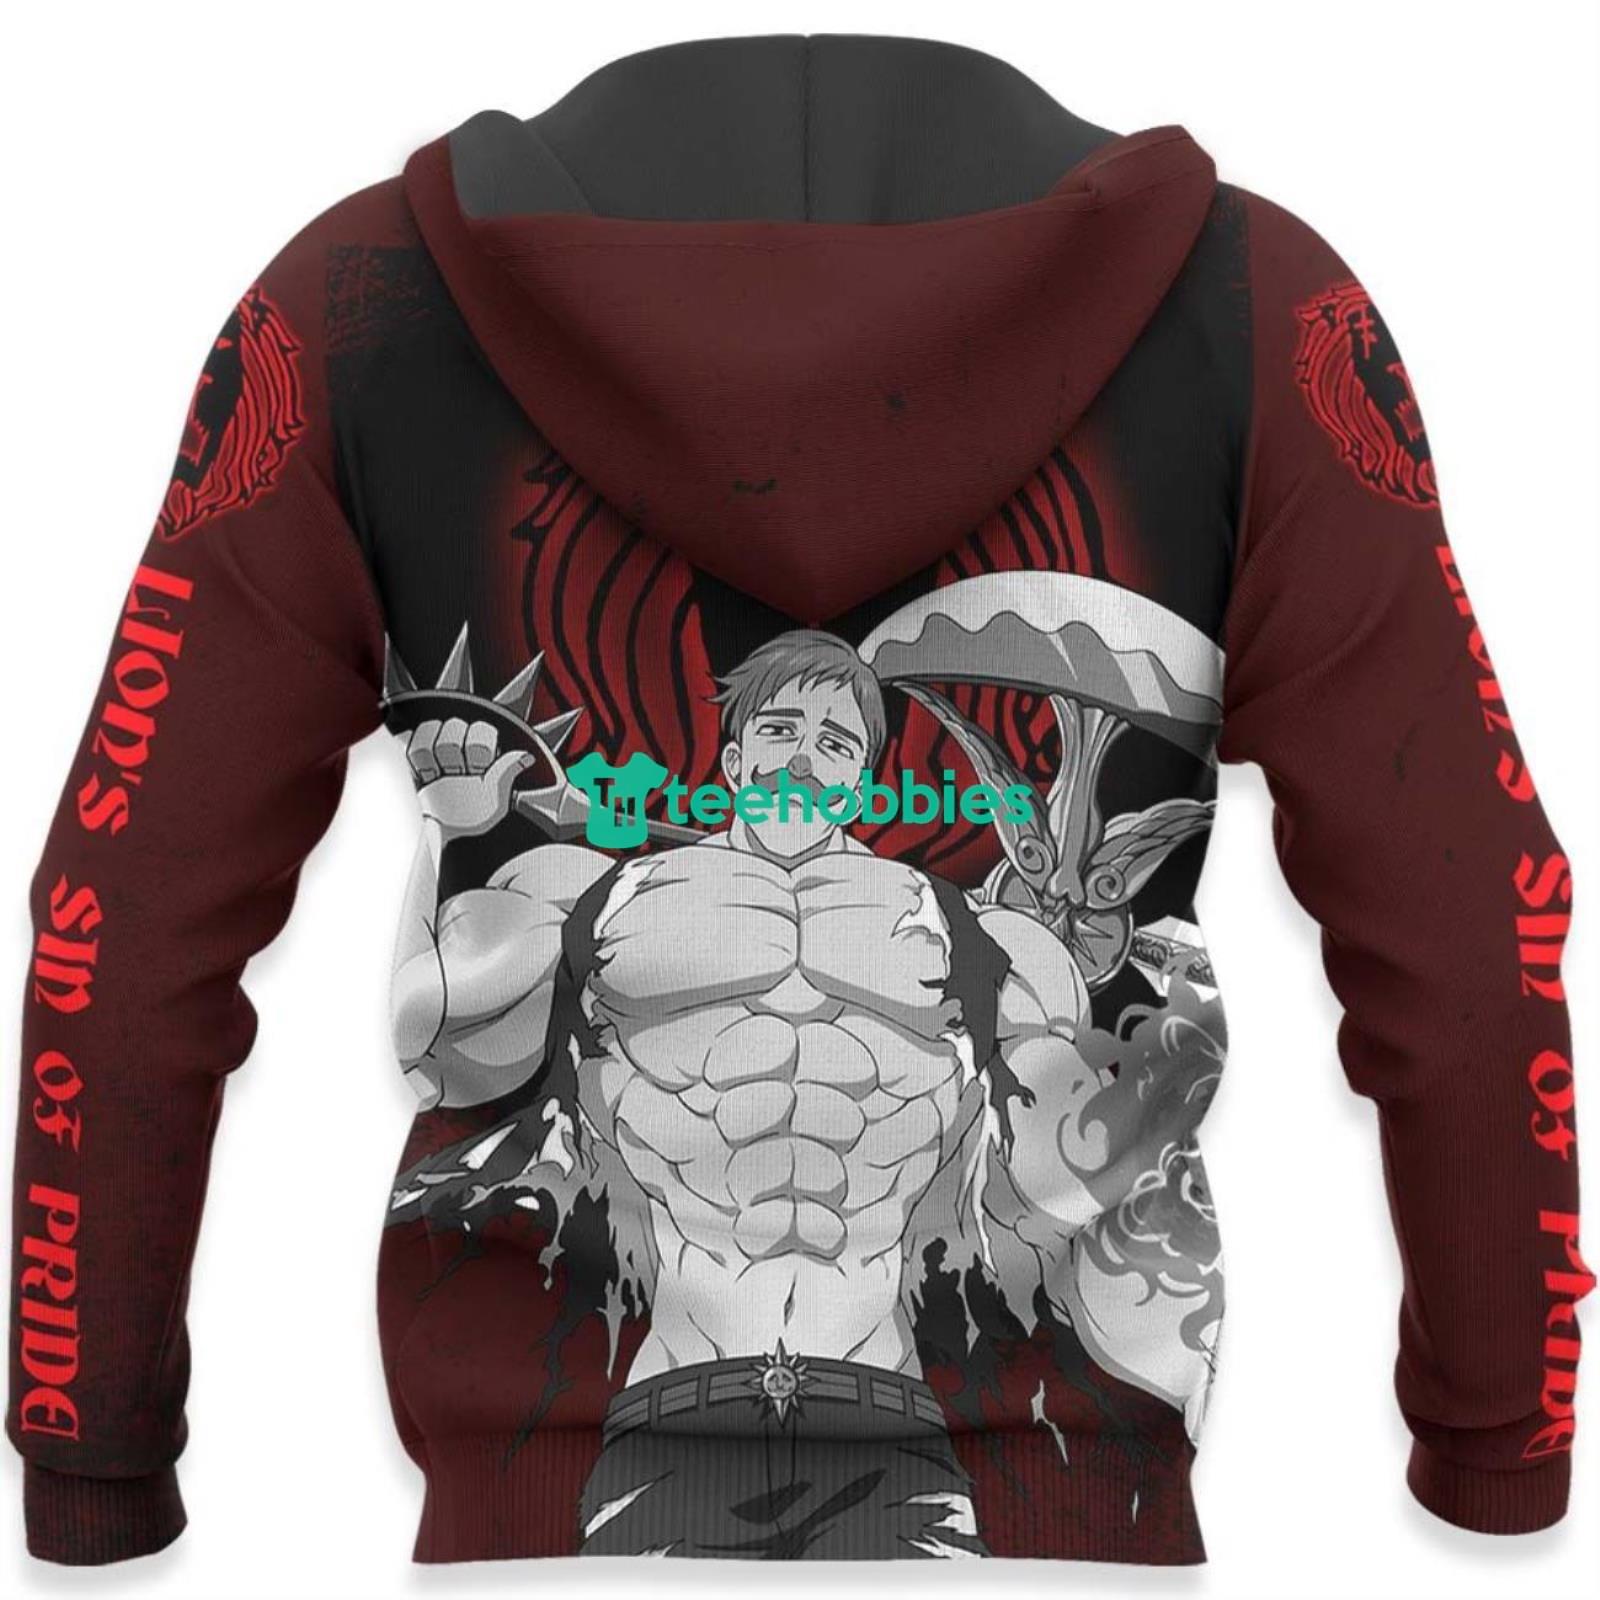 lions sin of pride escanor all over printed 3d shirt seven deadly sins anime fans 4px Lion's Sin of Pride Escanor All Over Printed 3D Shirt Seven Deadly Sins Anime Fans